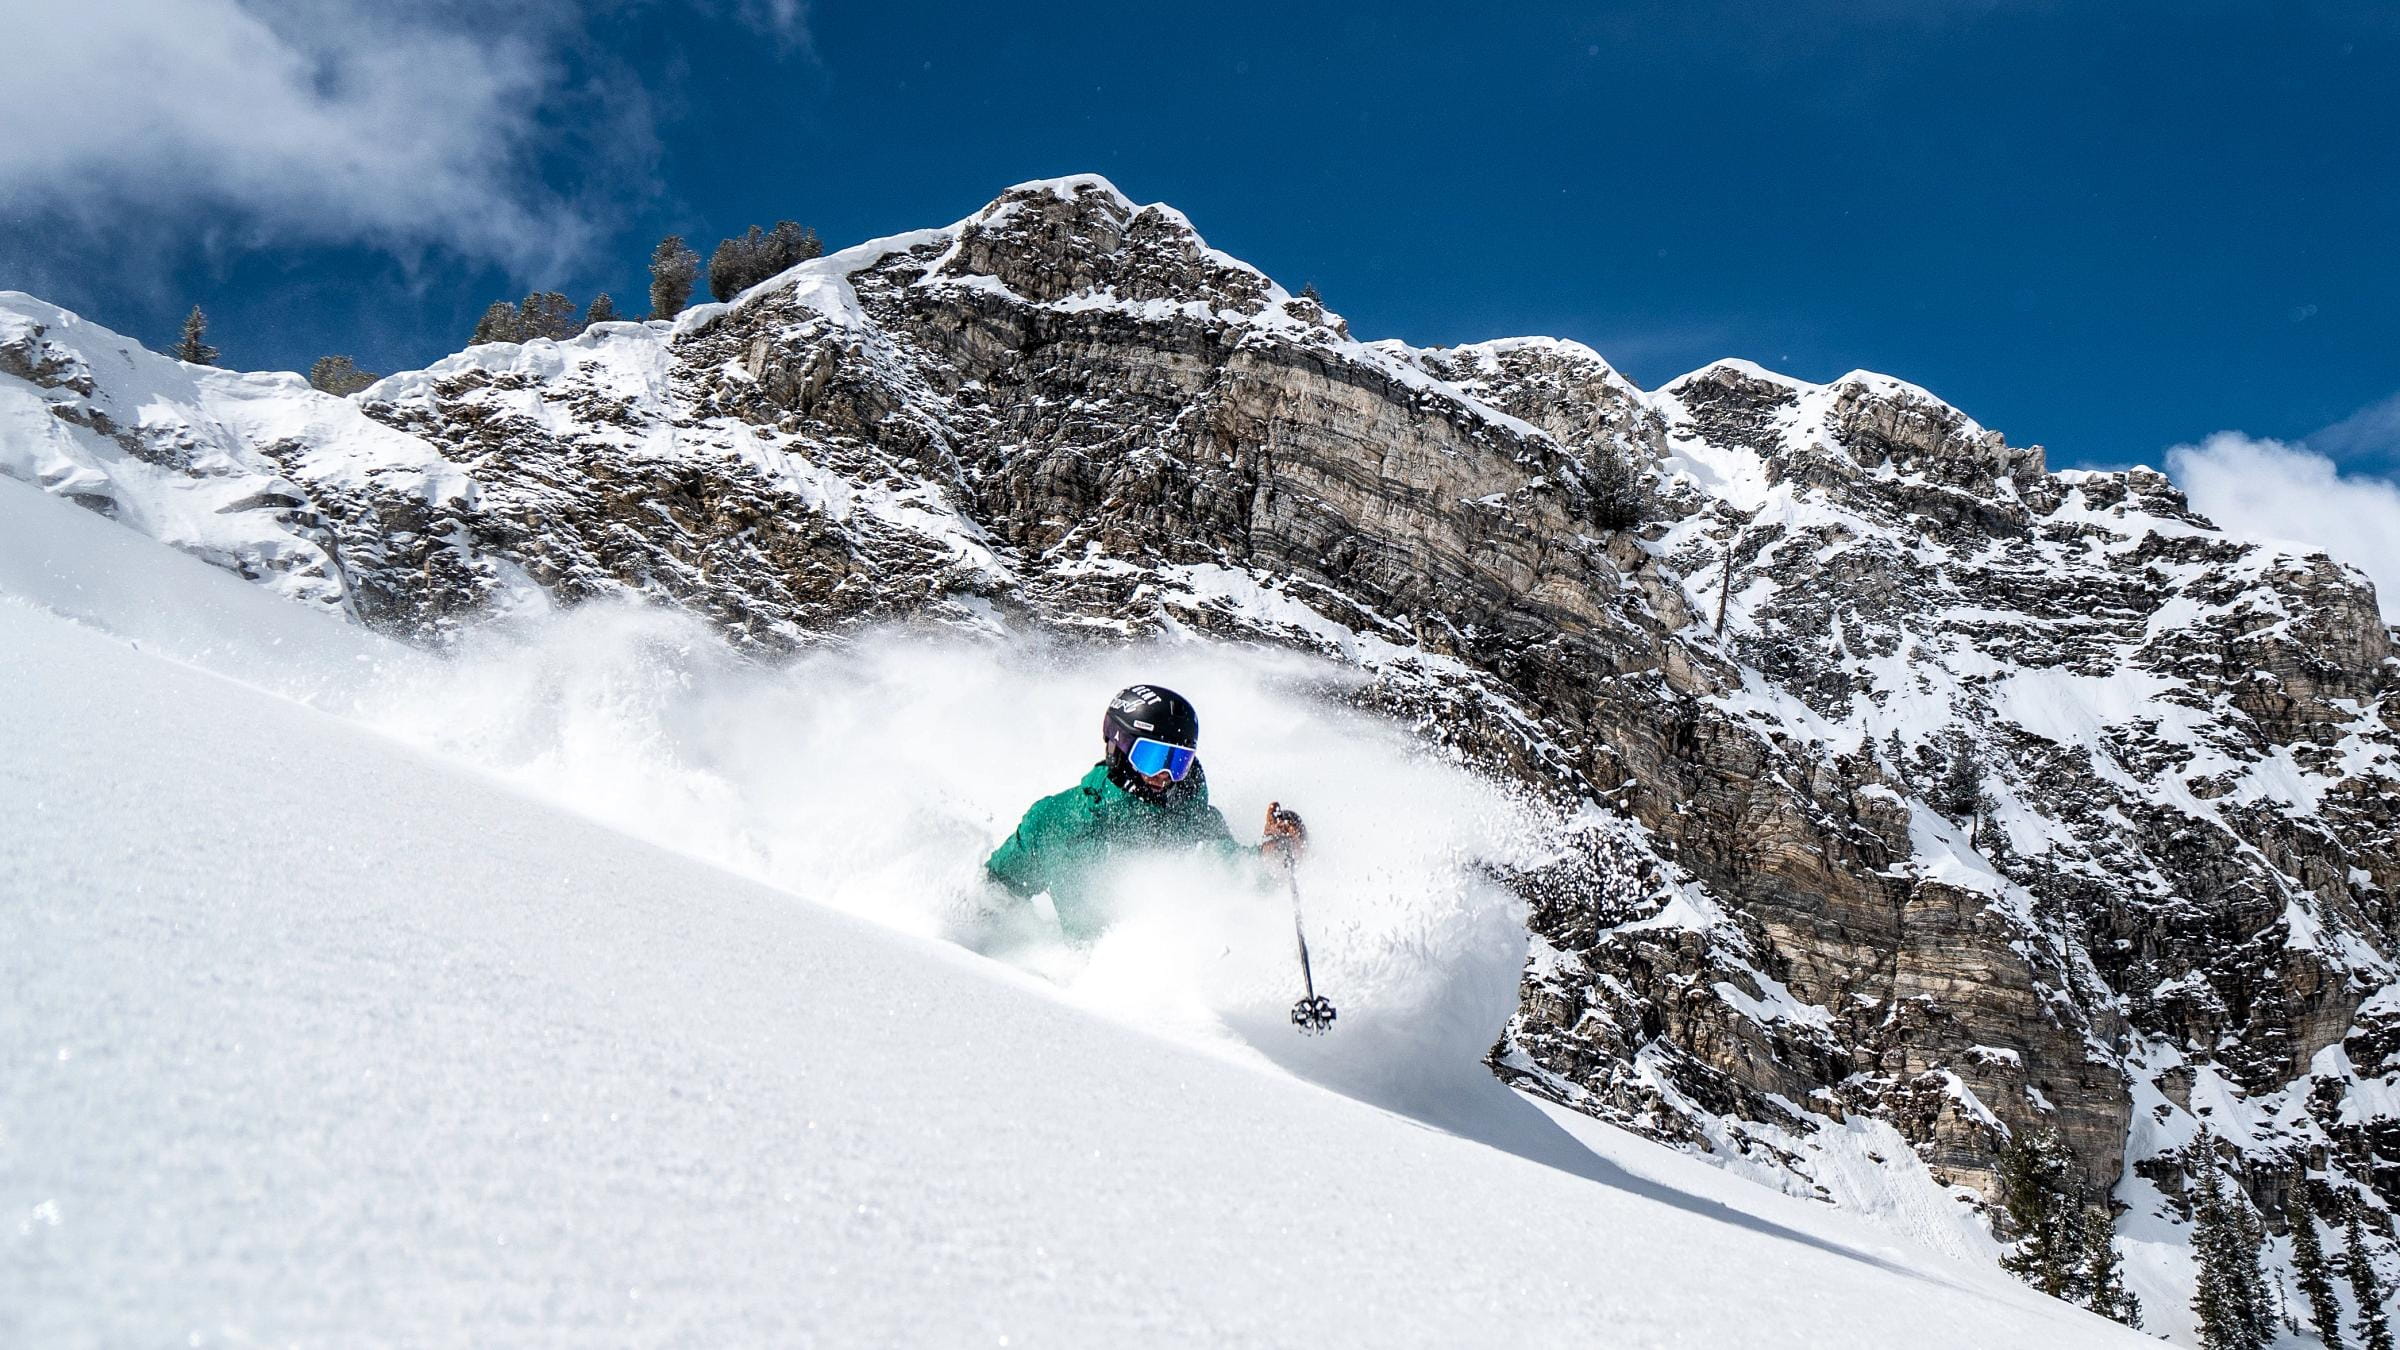 A male skier makes a powder turn in Honeycomb Canyon at Solitude Mountain Resort